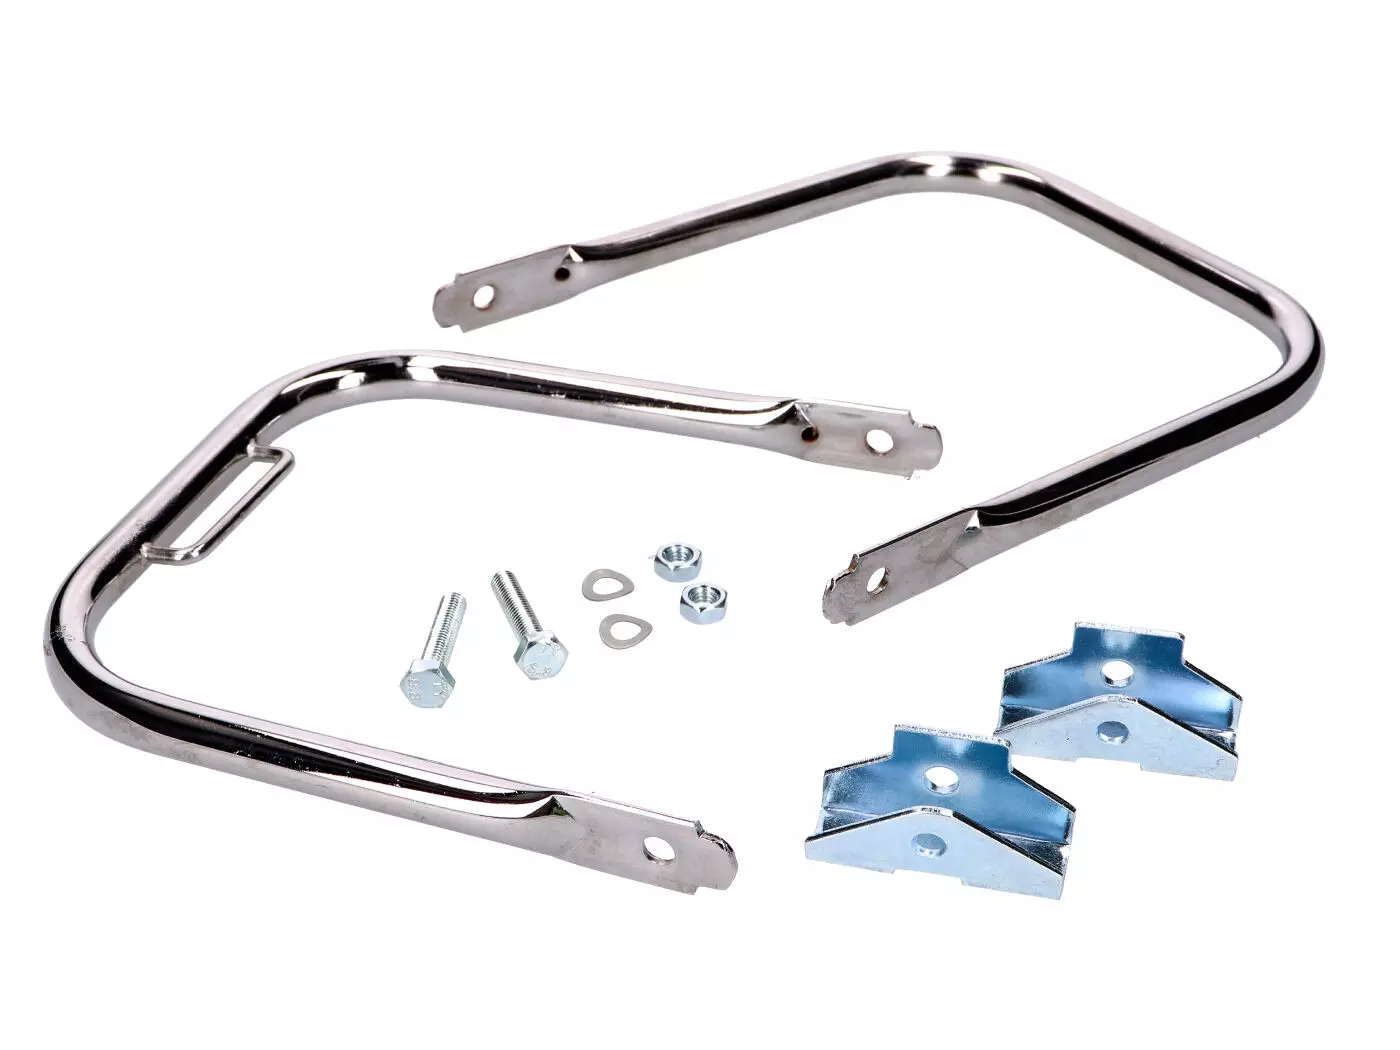 Rear Luggage Rack Chromed W/ Short Support Handle For Simson S50, S51, S70